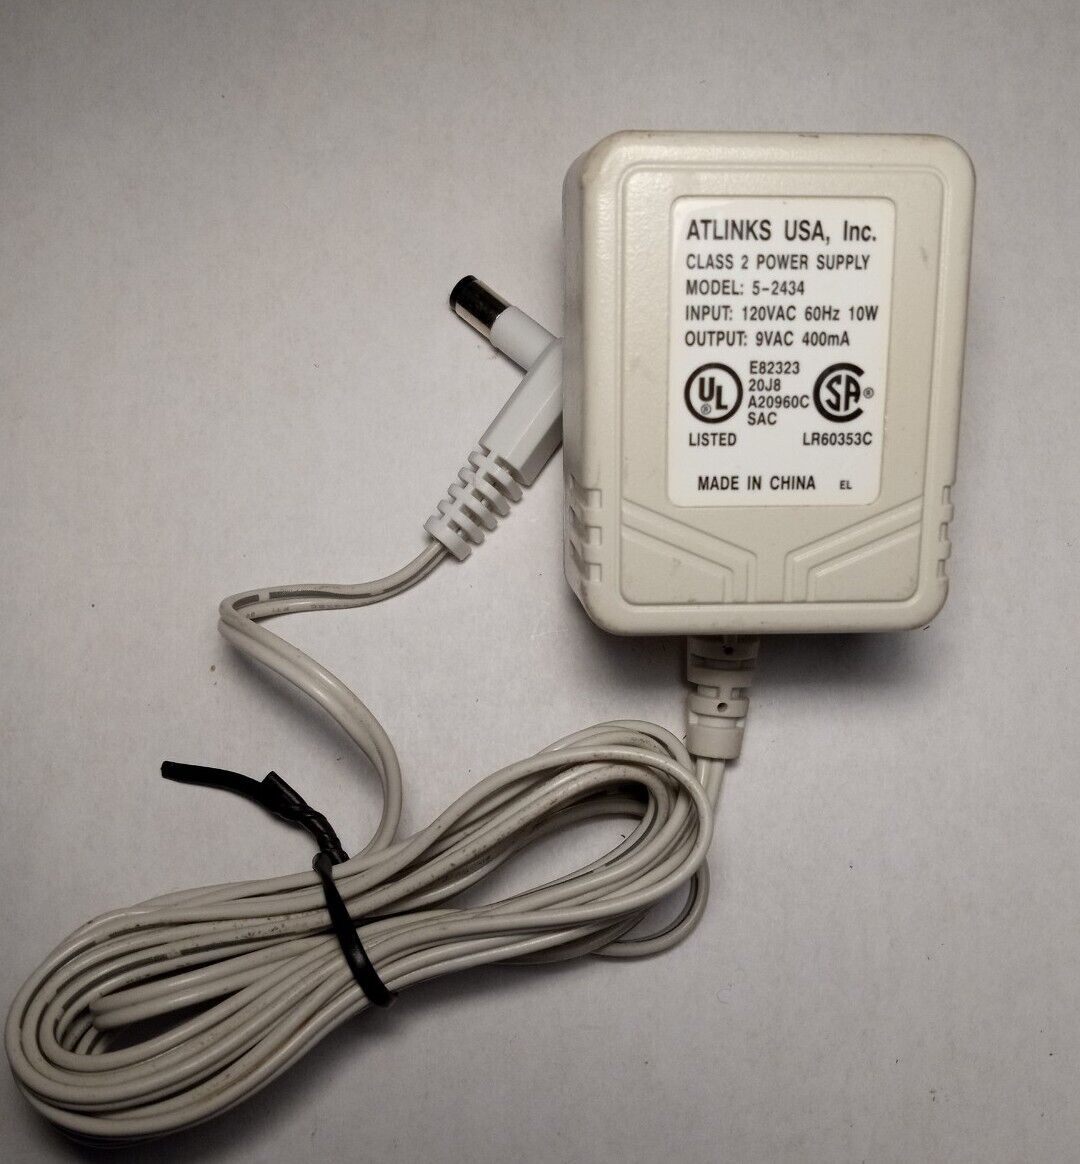 Atlinks USA 5-2434 Class 2 Power Supply 9VAC 400mA AC Adapter Charger Tested Brand: ATLINKS Type: Transformer Color: - Click Image to Close